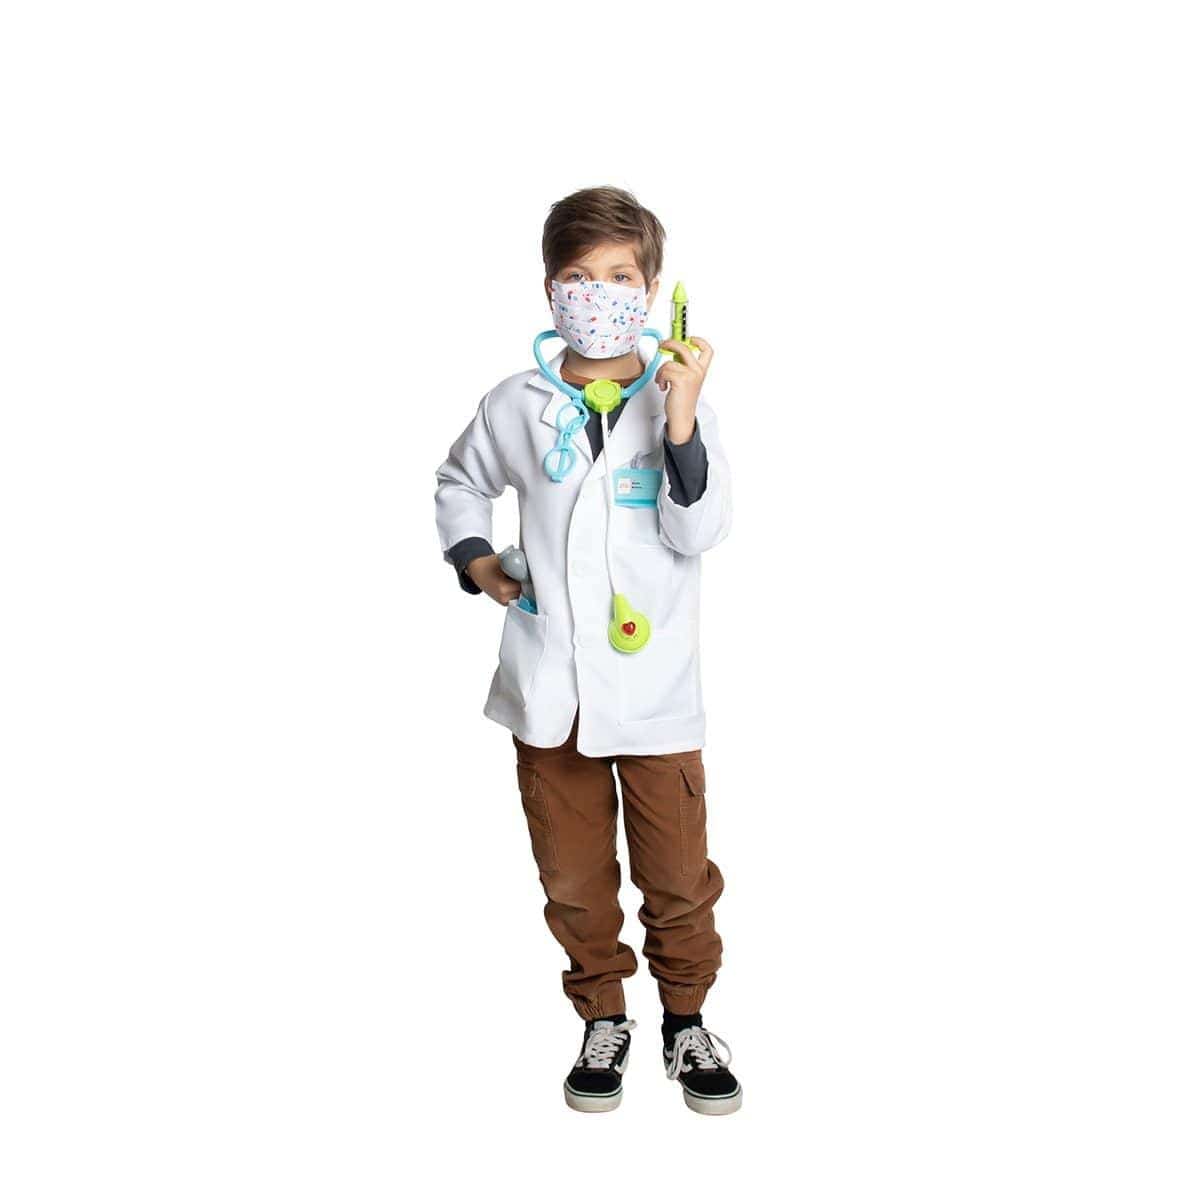 Buy Costumes Deluxe Doctor Role Play Set for Kids sold at Party Expert